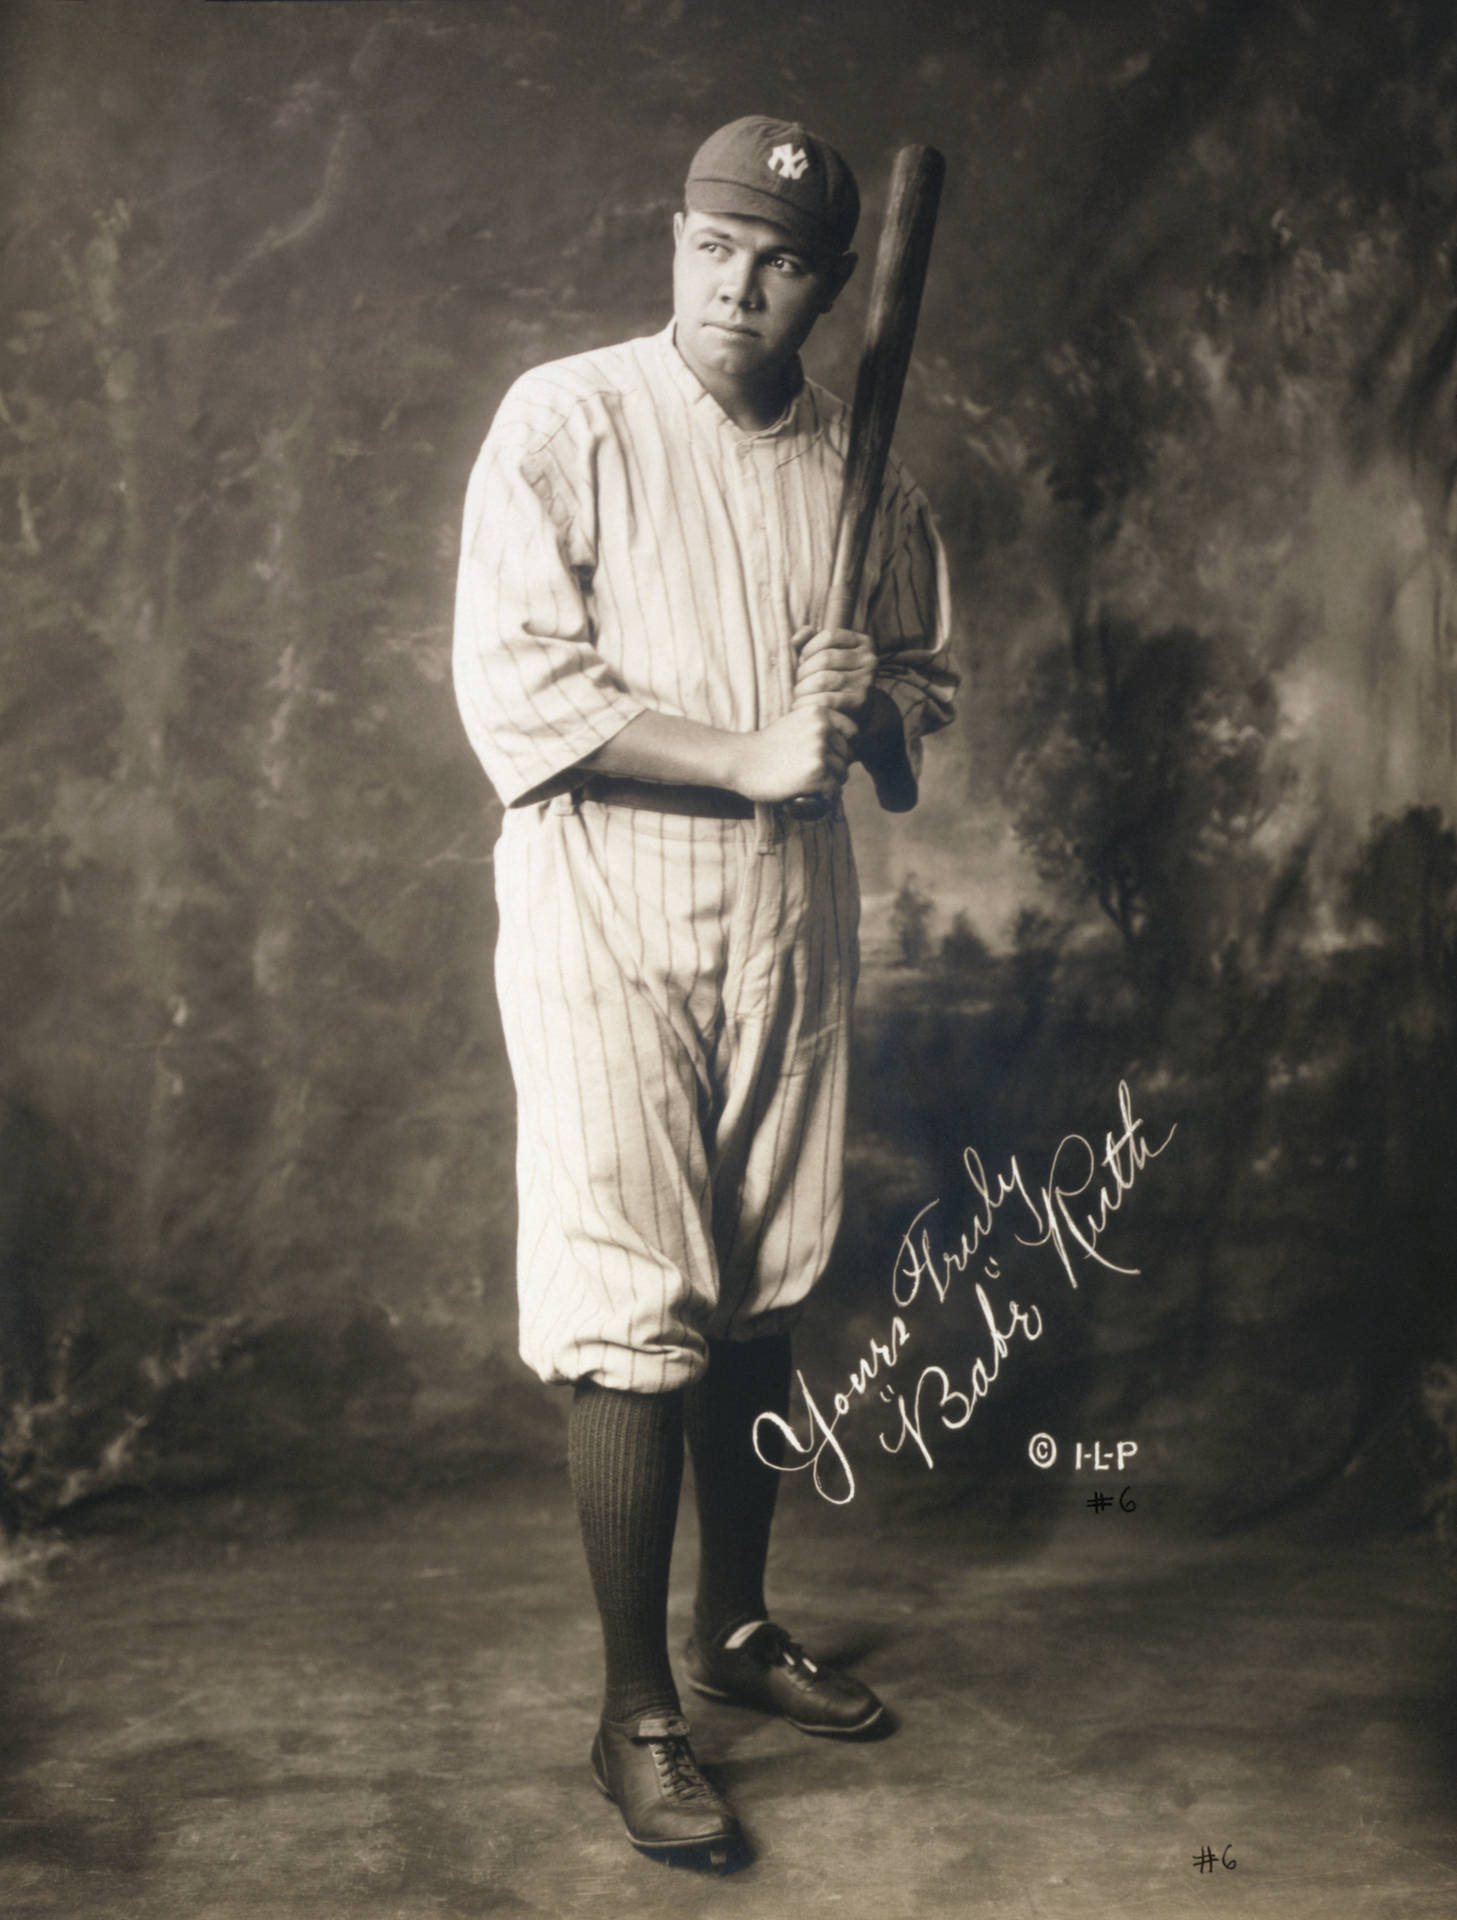 Babe Ruth Poster With Signature Background